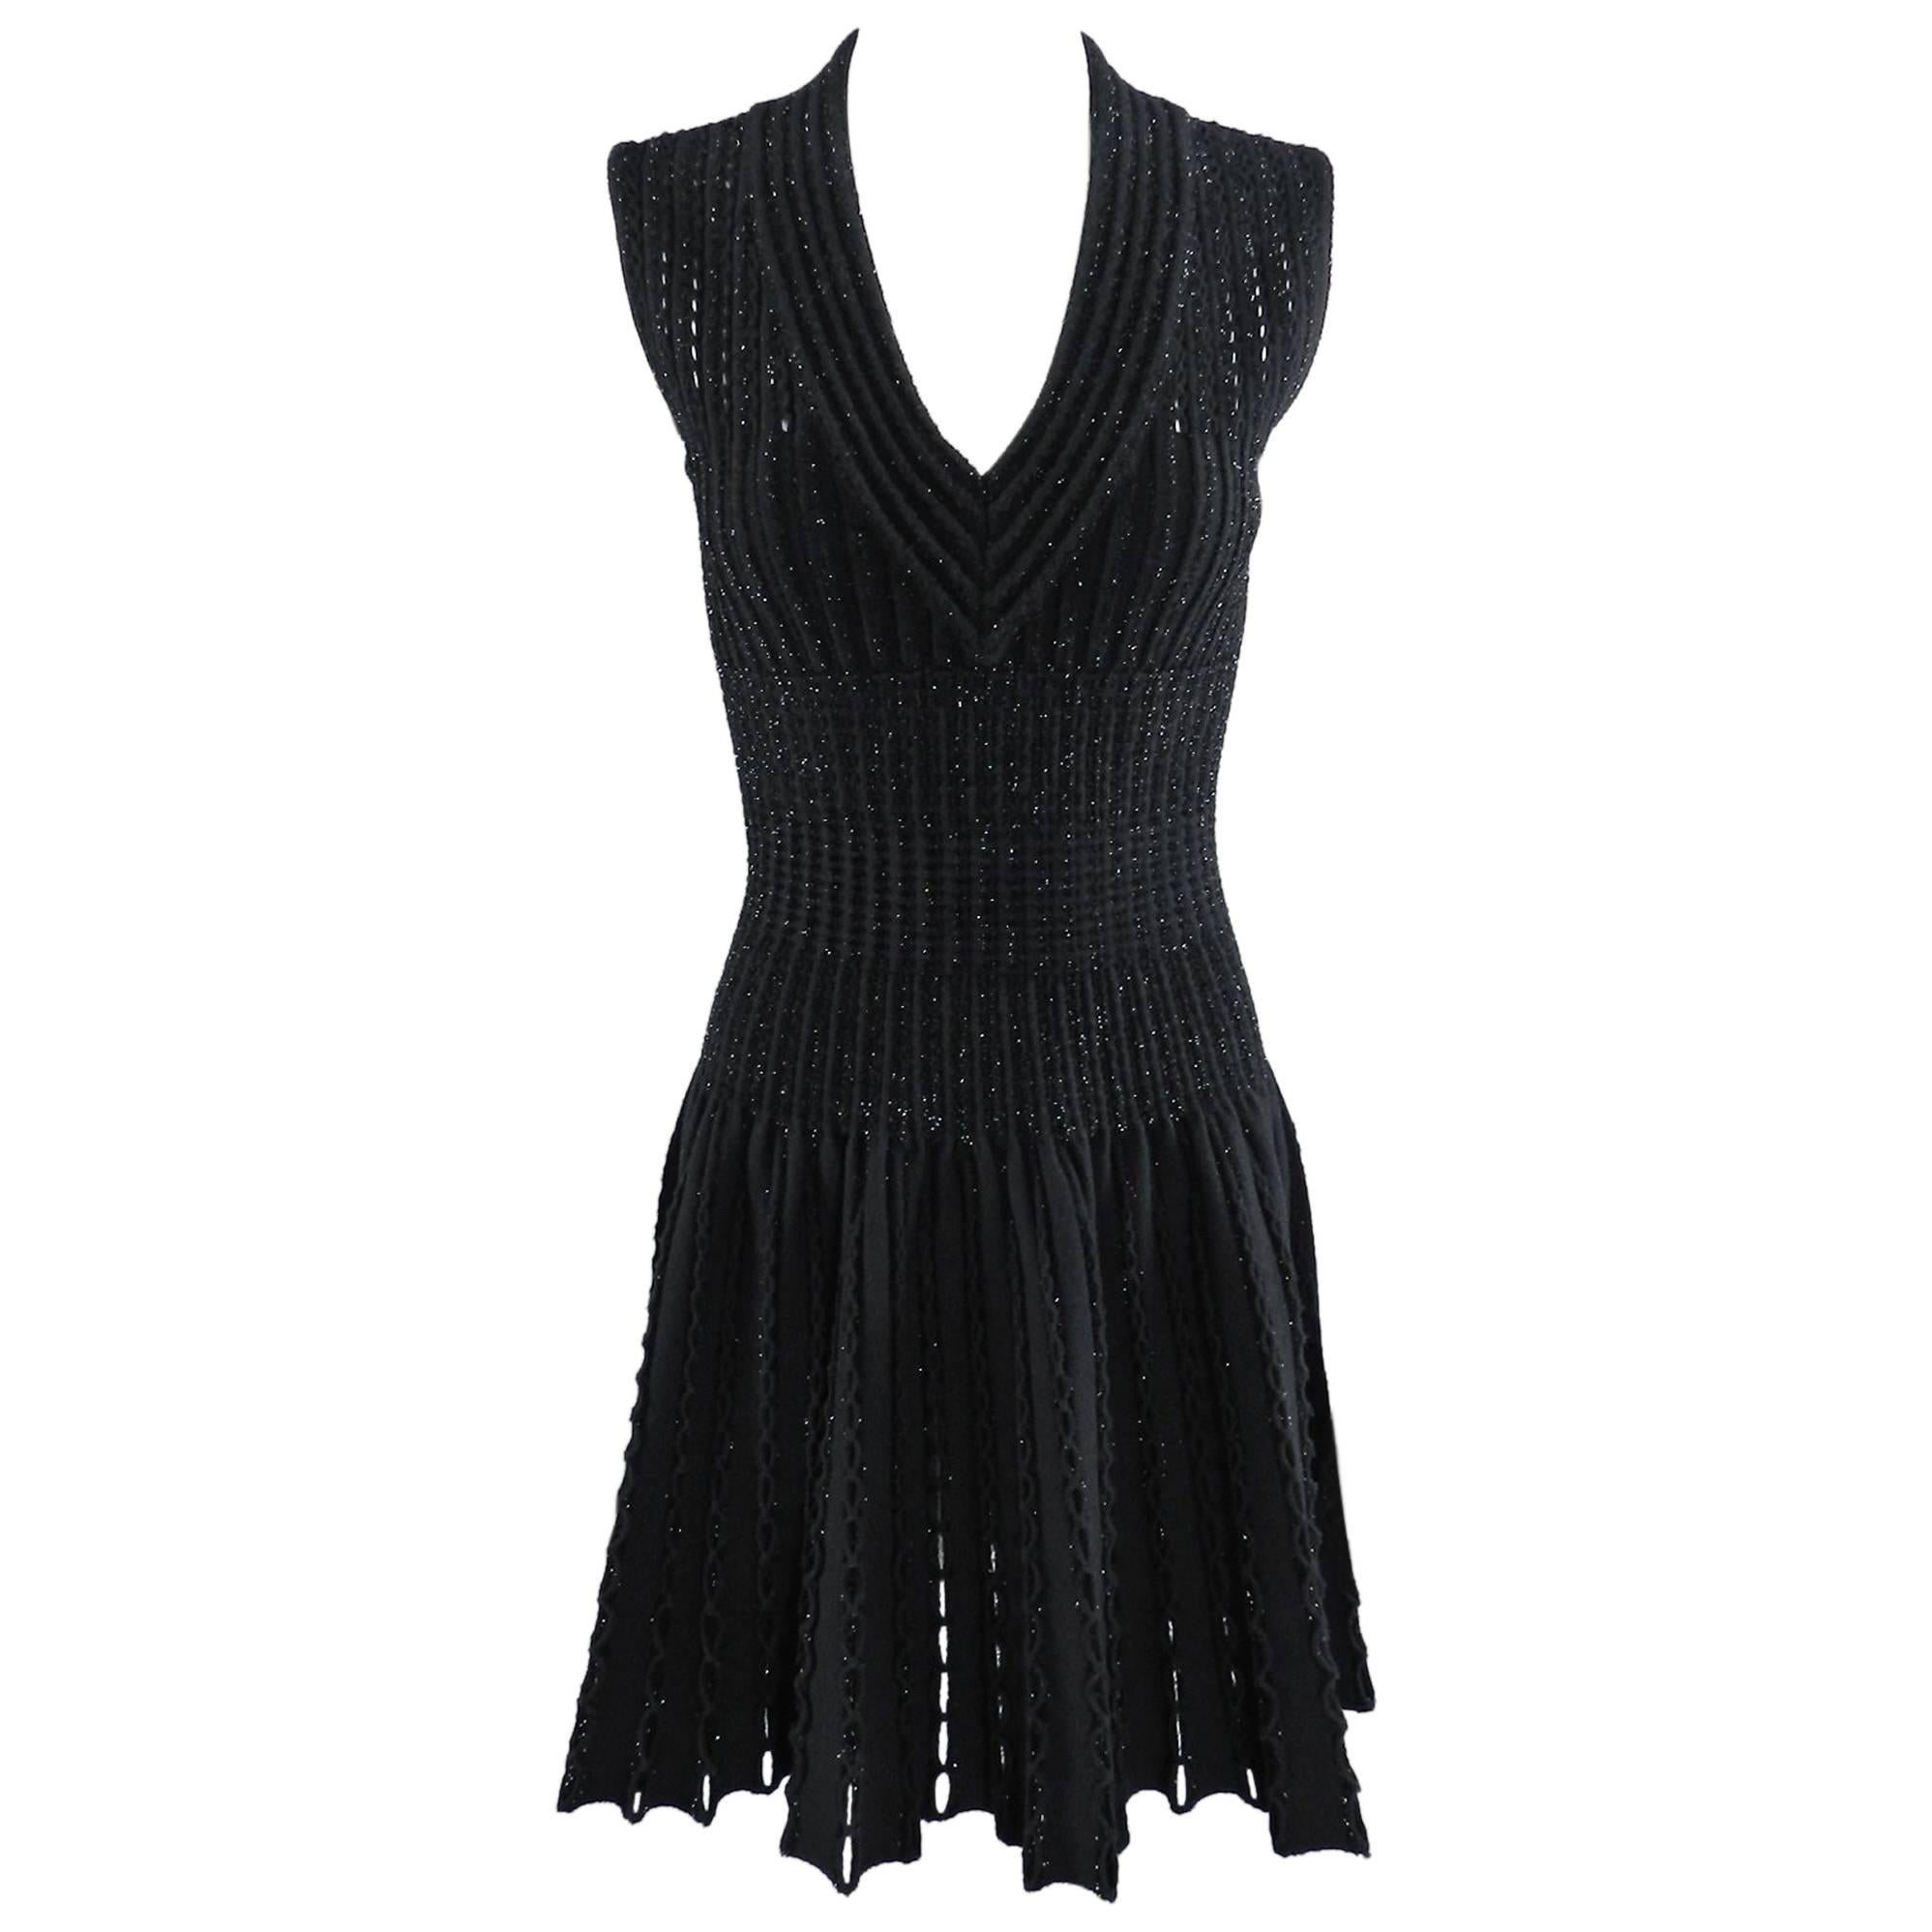 Alaia Black Knit Fit and Flare Cocktail Dress with Shimmer 